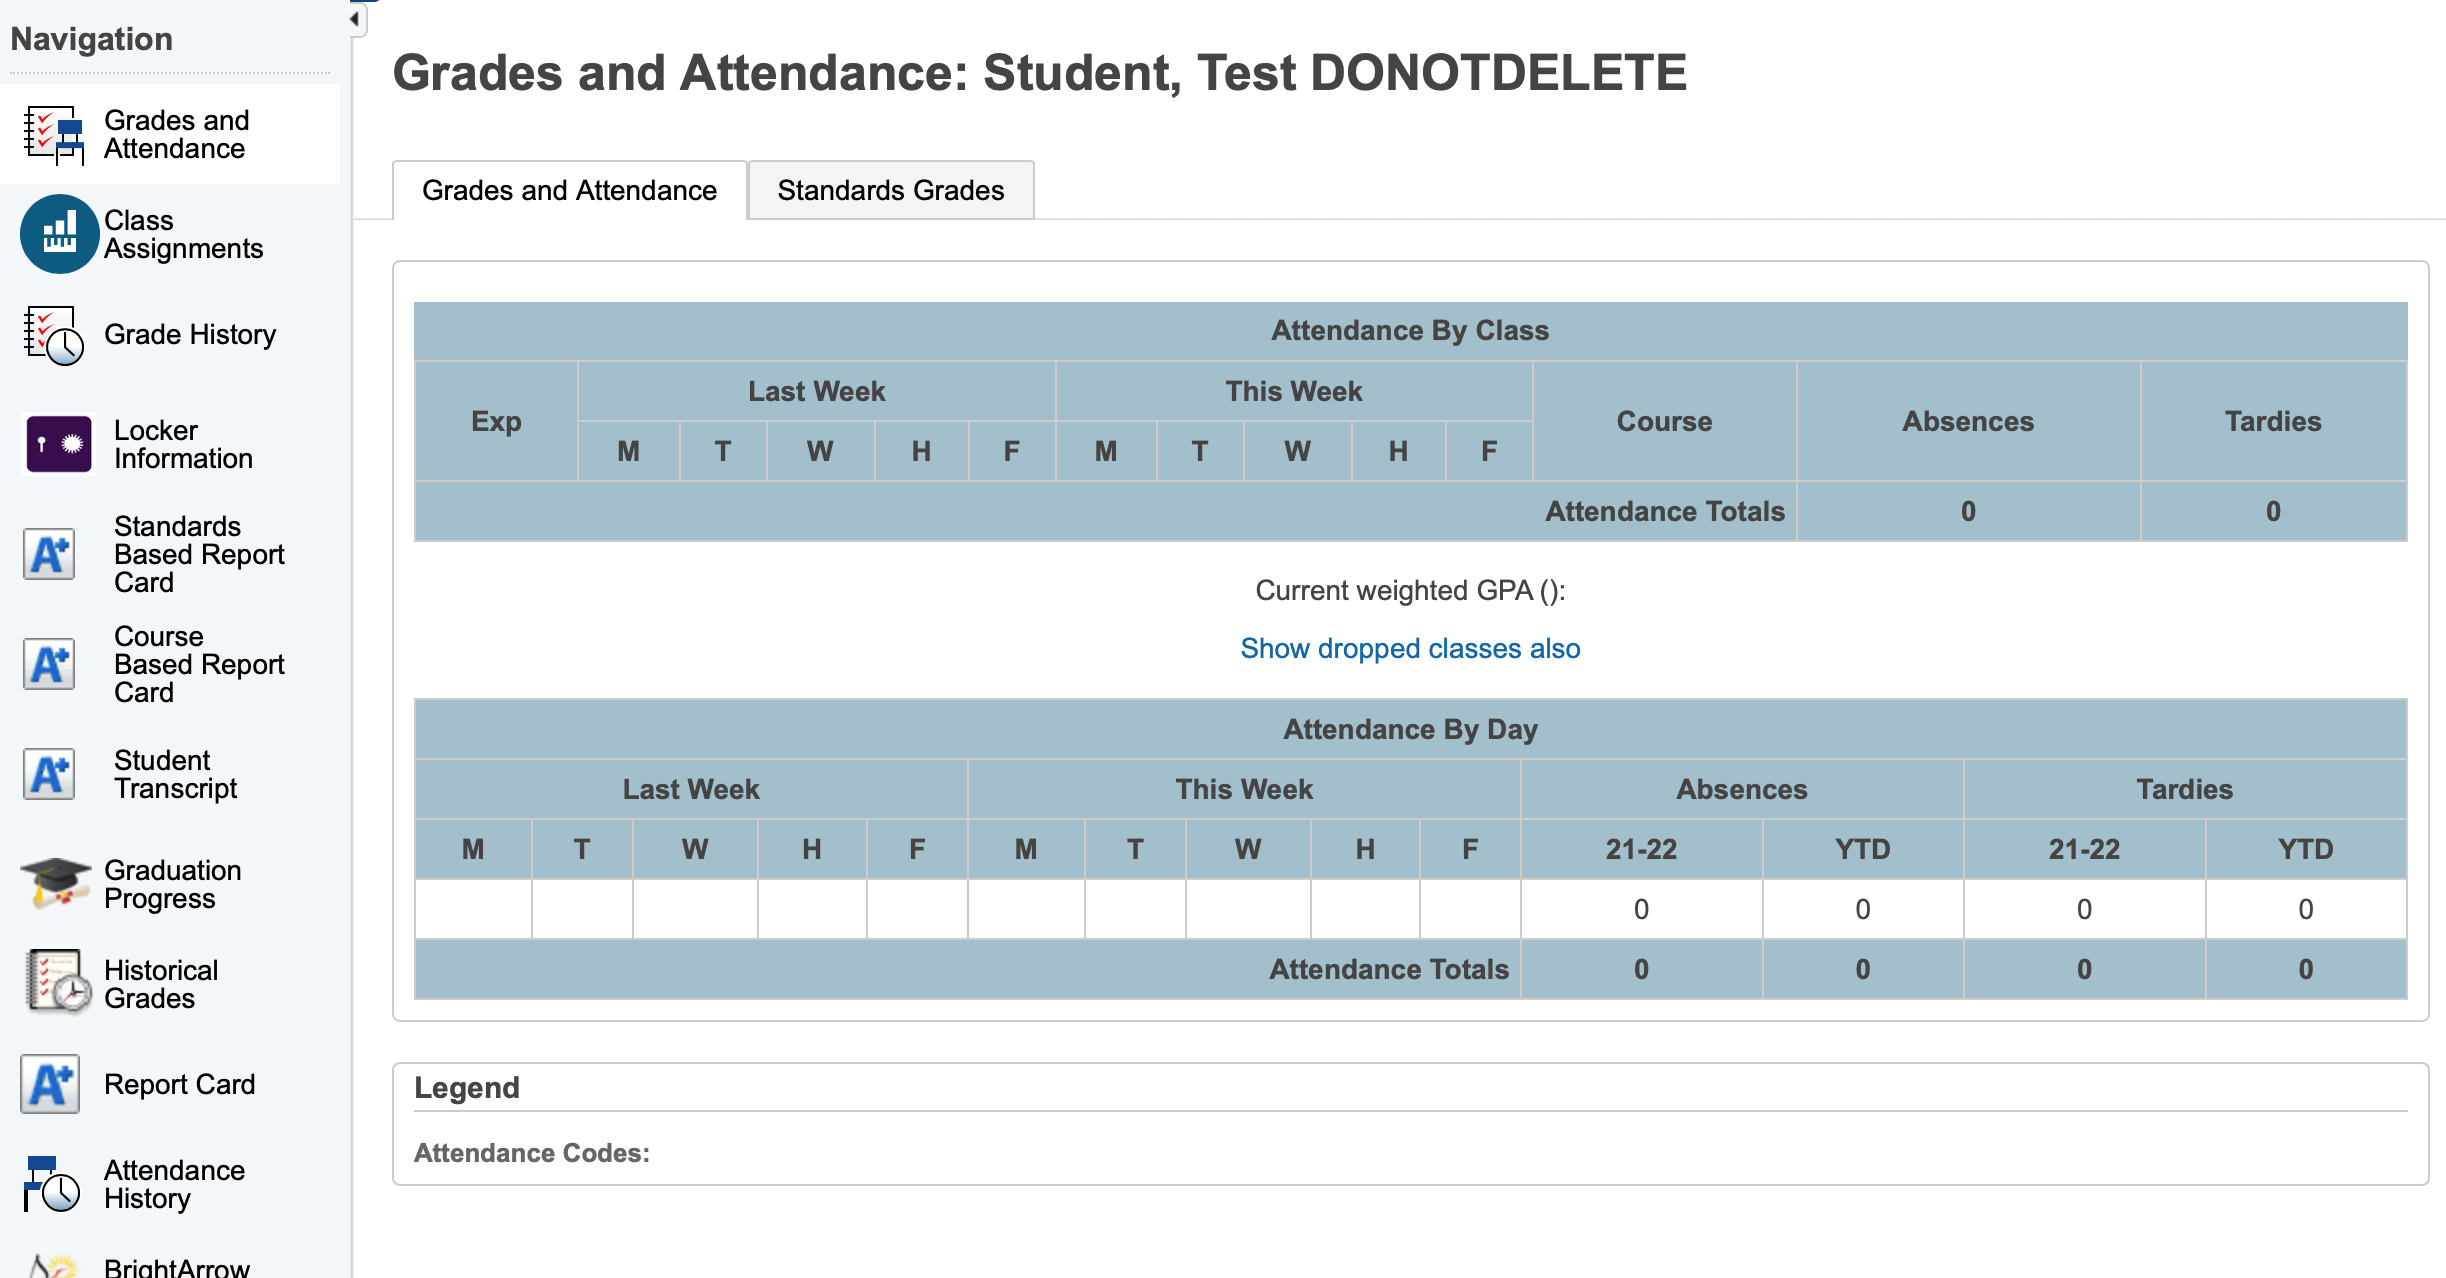 View of the student's grades/attendance. Along the left column, there are several other choices for viewing other stuff.